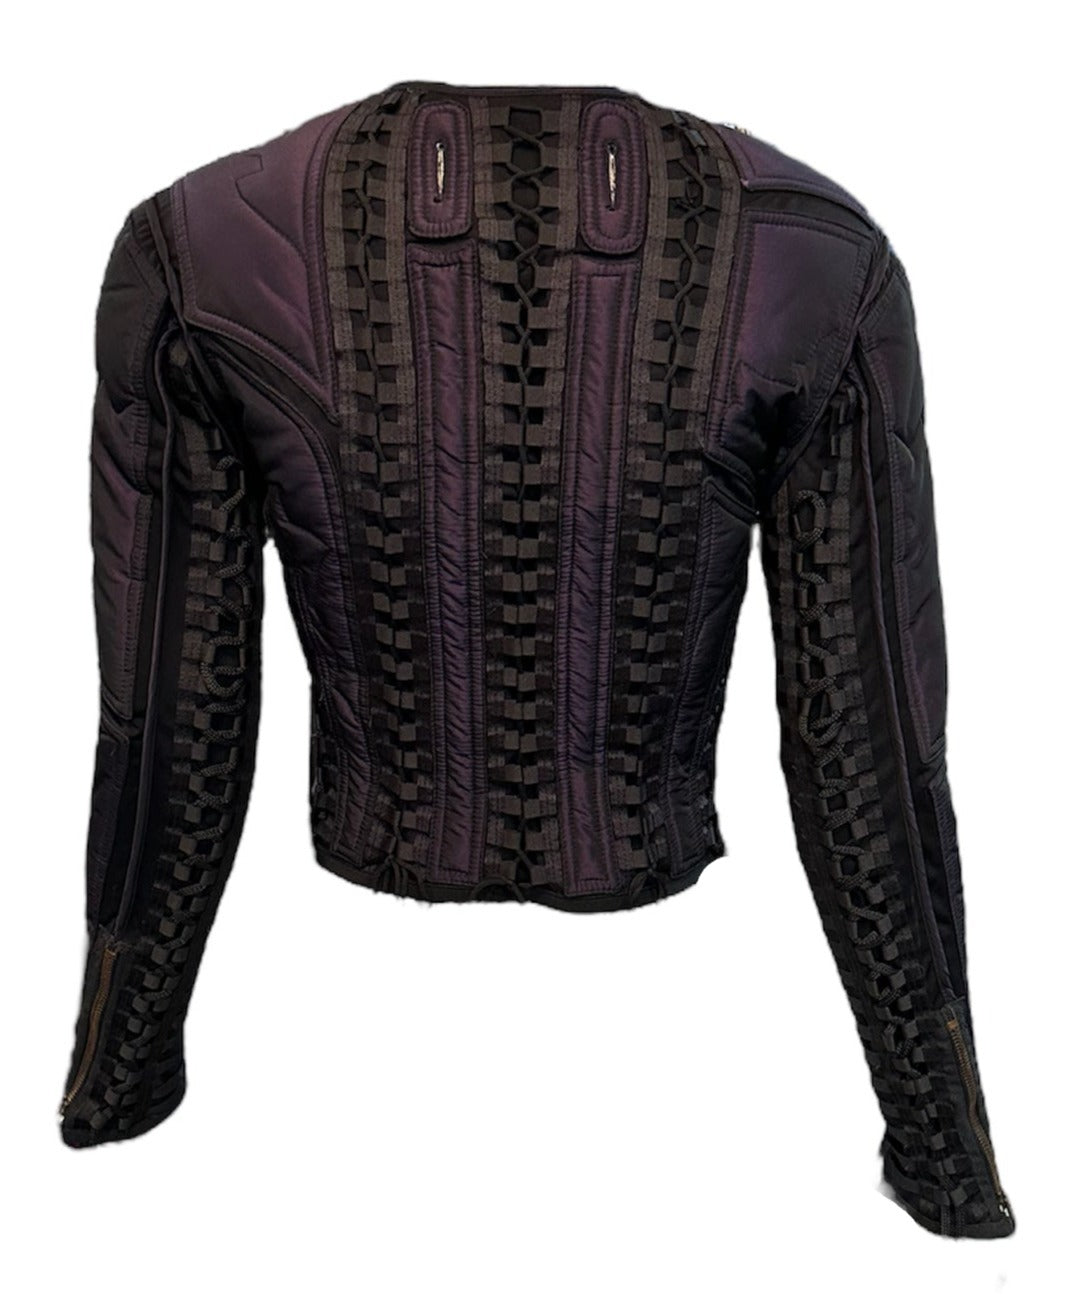 Jean Paul Gaultier Femme Y2K Iridescent Purple Nylon Zip Front Jacket with Allover Lacing BACK 3 of 8